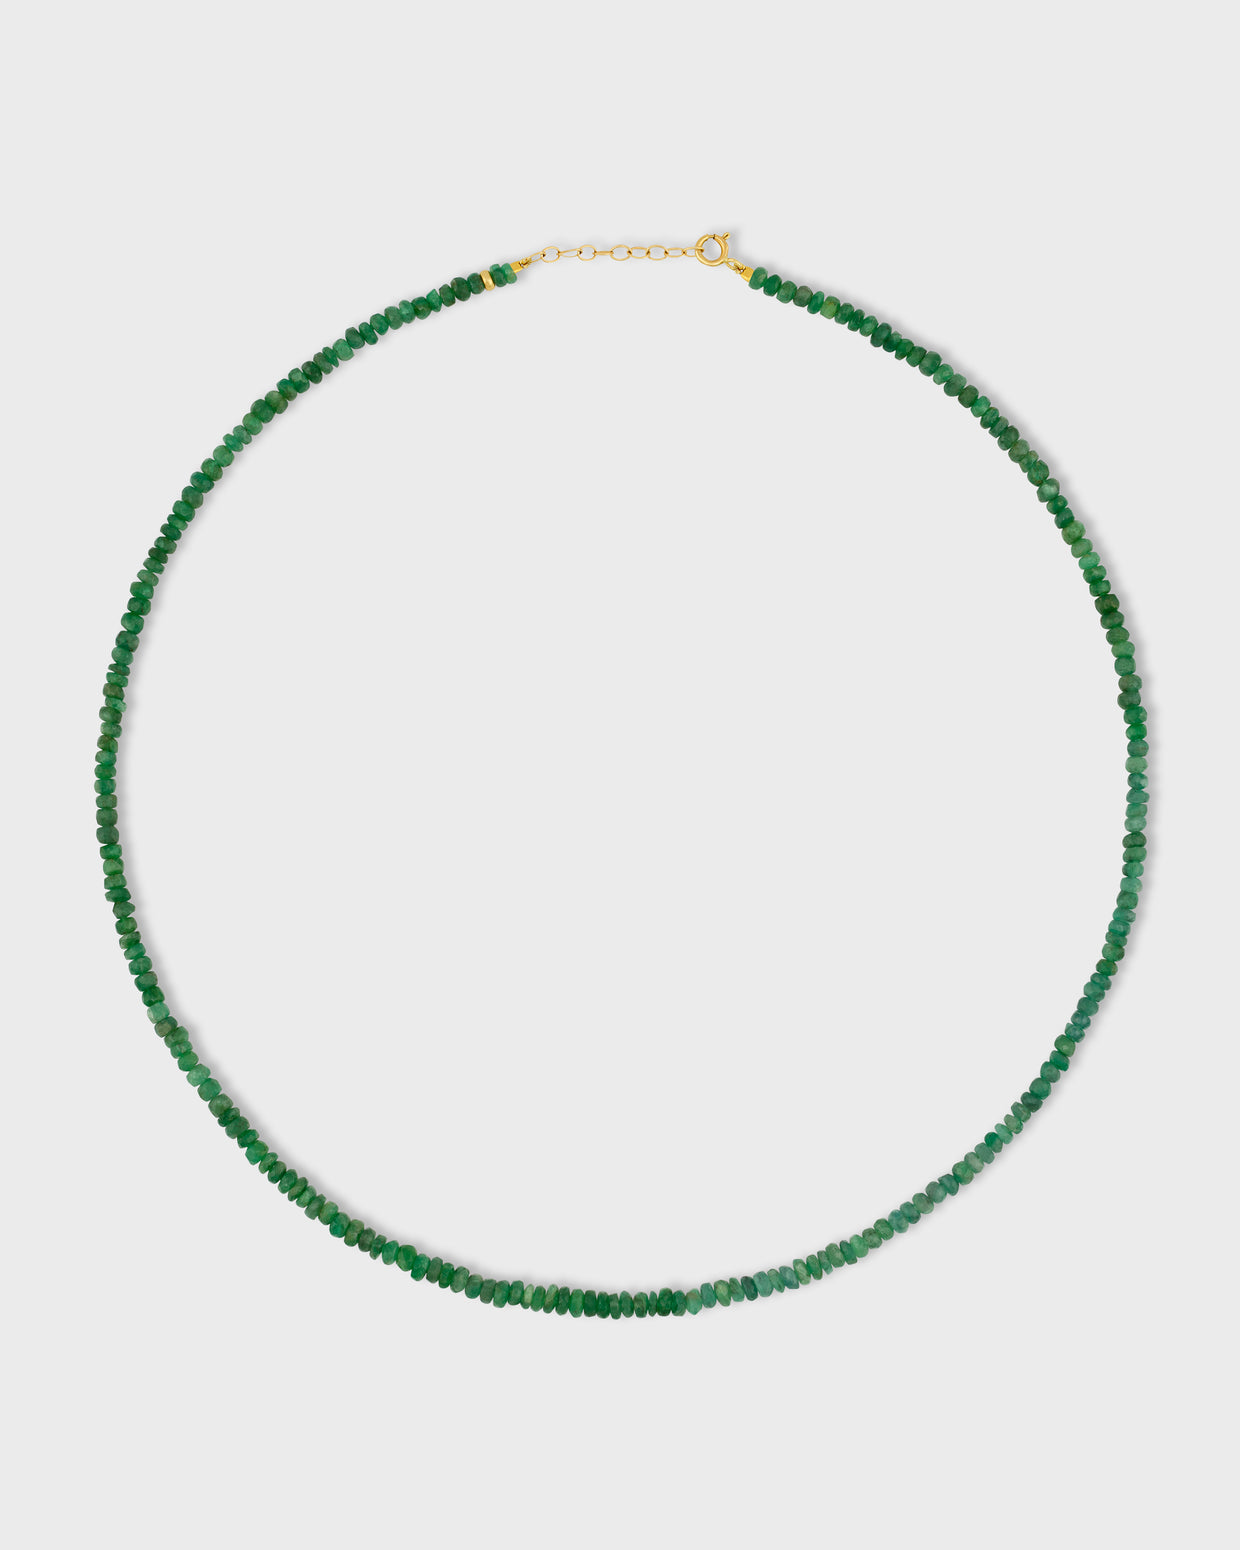 Birthstone May Emerald Beaded Necklace